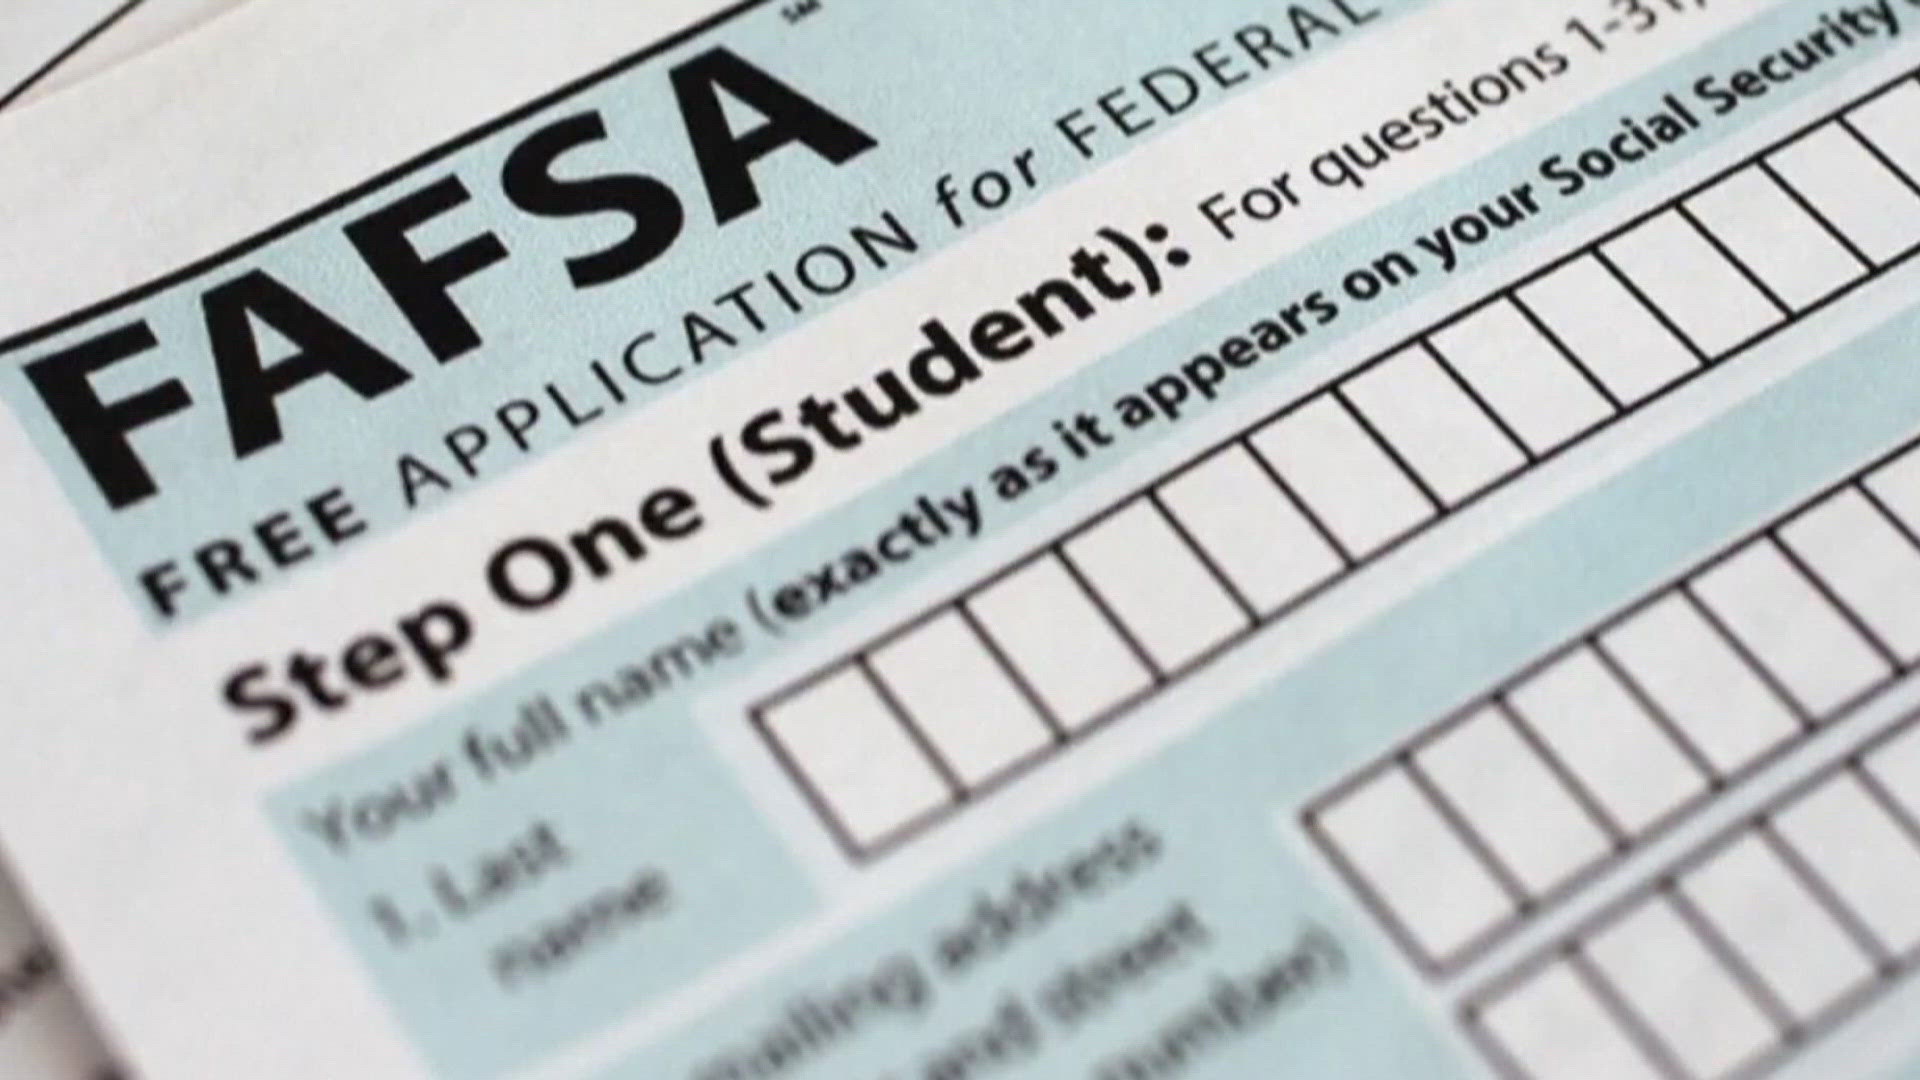 The Denver Scholarship Foundation is offering support to students with a free FAFSA application workshop on April 25 from 3 p.m. to 6 p.m.